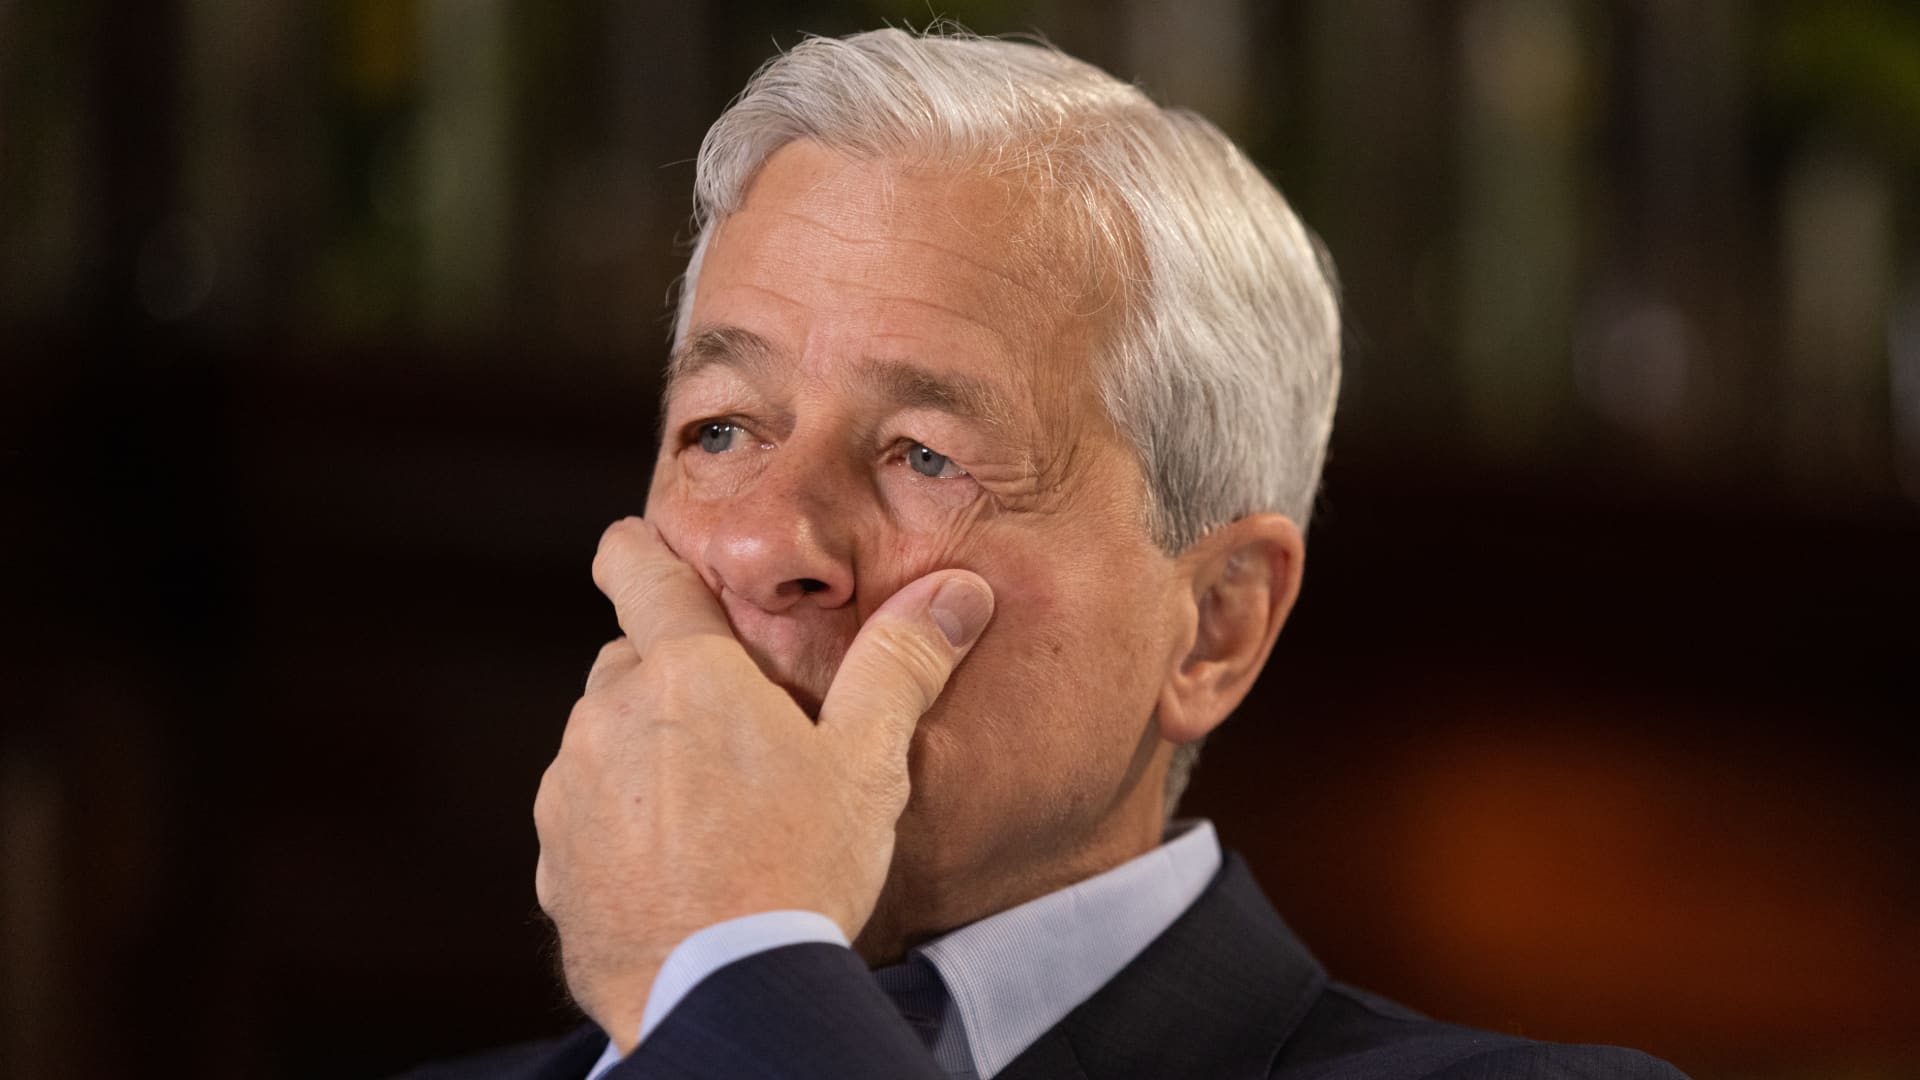 Jamie Dimon issues warning on rates: ‘It will undress problems in the economy’